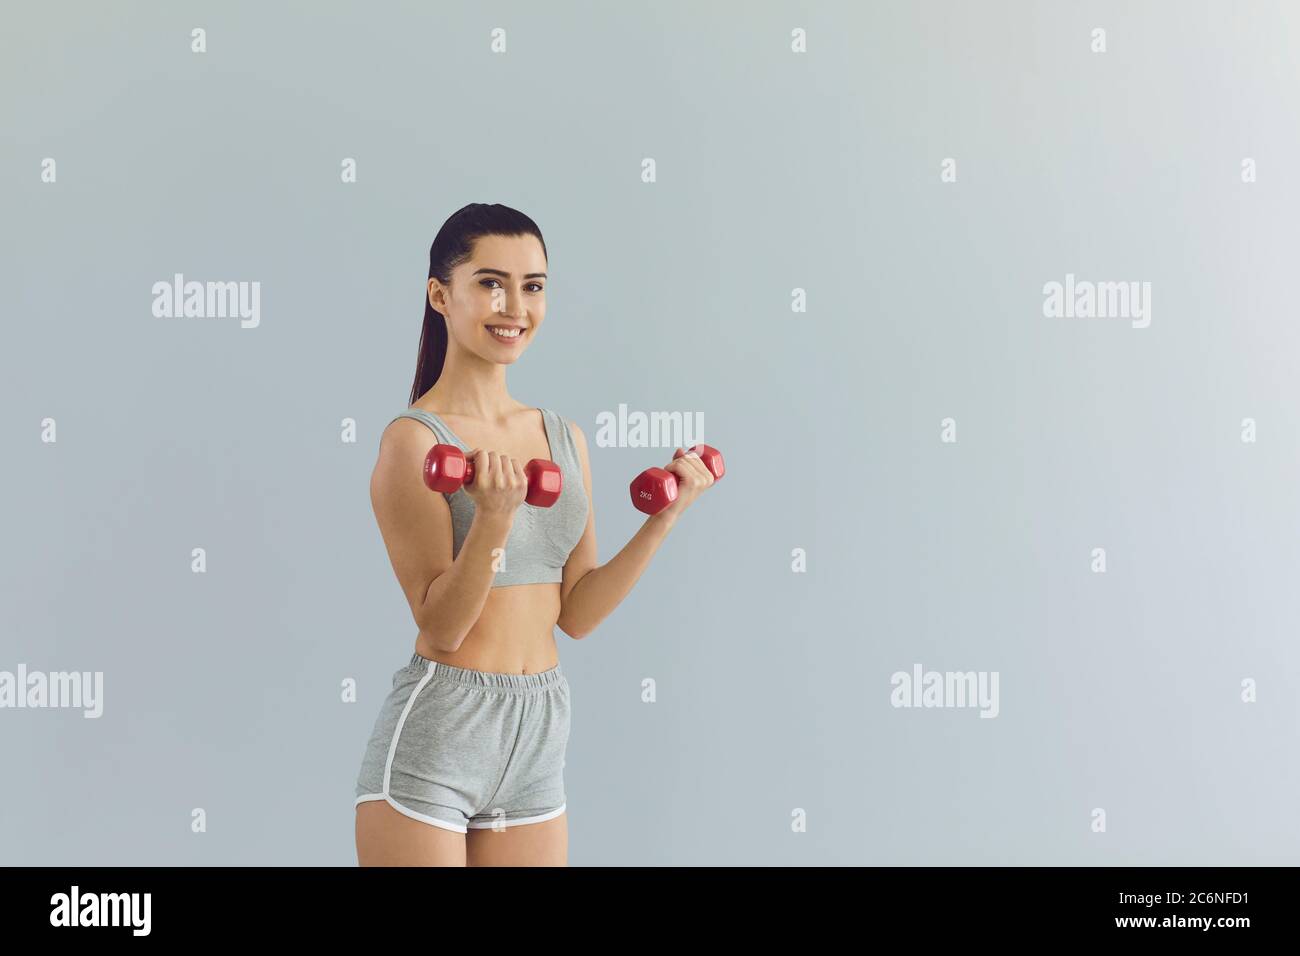 Cheerful fit female athlete training with dumbbells near gray wall Stock Photo